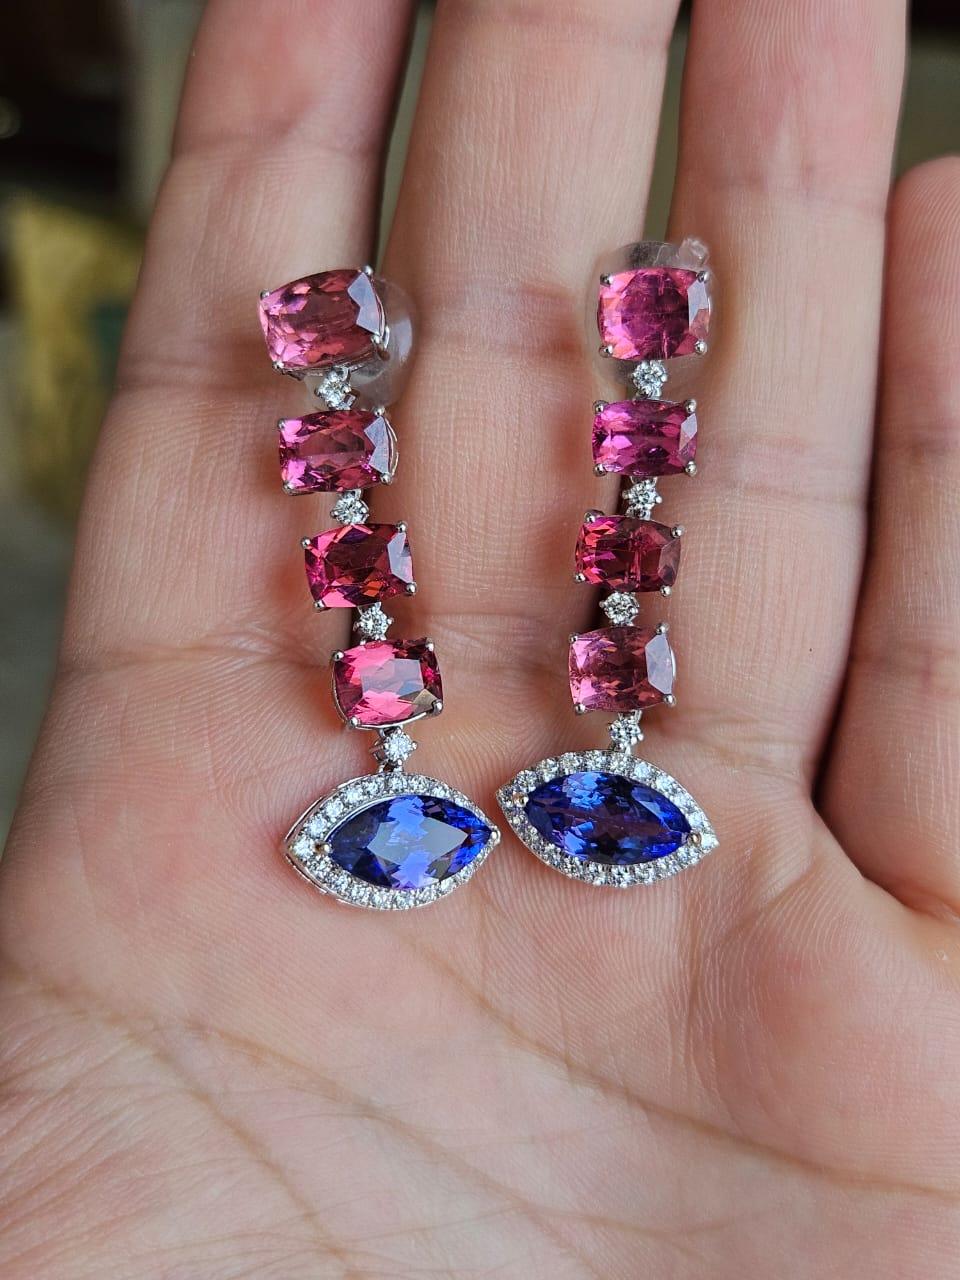 A very gorgeous and beautiful, Tourmaline & Tanzanite Chandelier Earrings set in 18K White Gold & Diamonds. The weight of the Tourmalines is 9.32 carats. The weight of the marquise shaped Tanzanite is 4.26 carats. The Tanzanites are responsibly